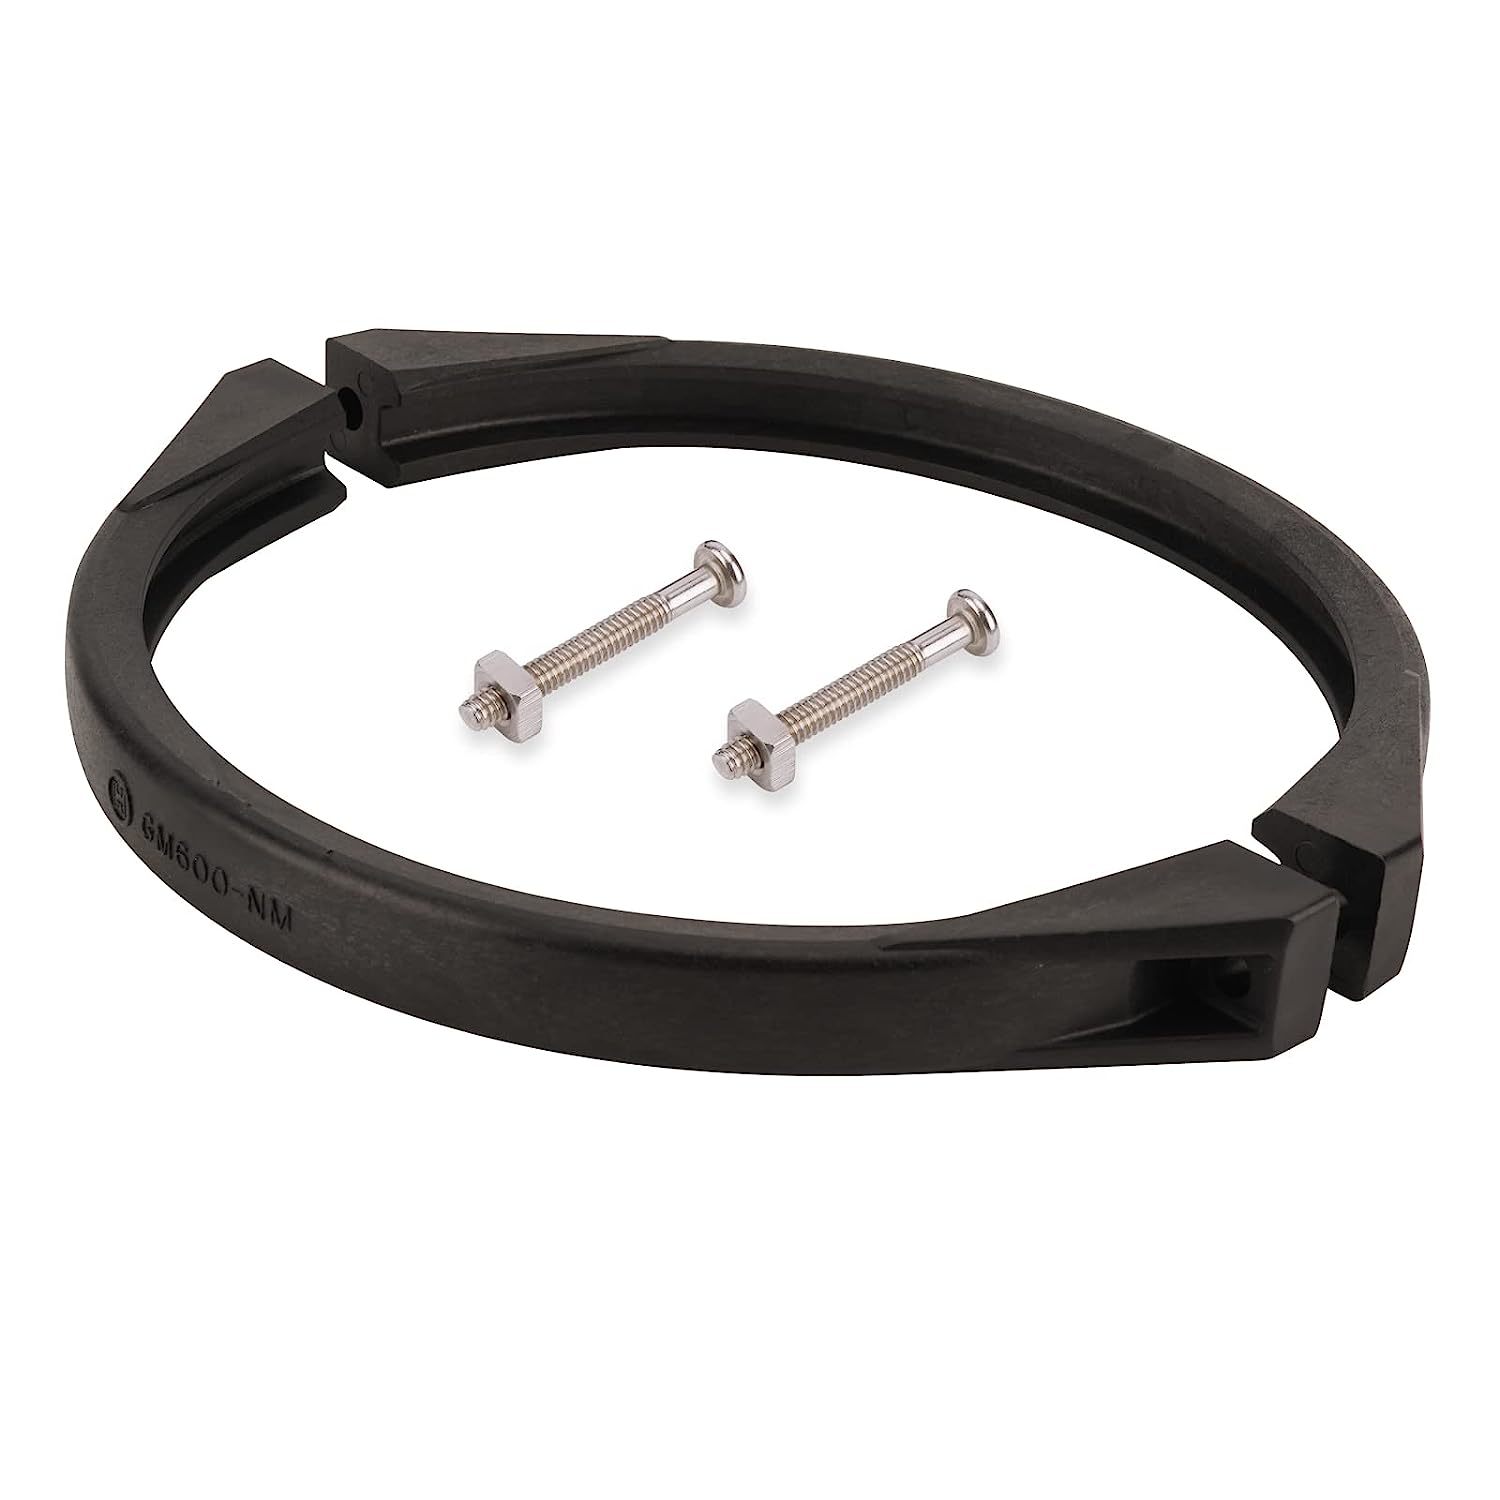 Gmx600Nm Noryl Flange Valve Clamp Replacement, For Hayward Pro Series Sand Filte - $15.99